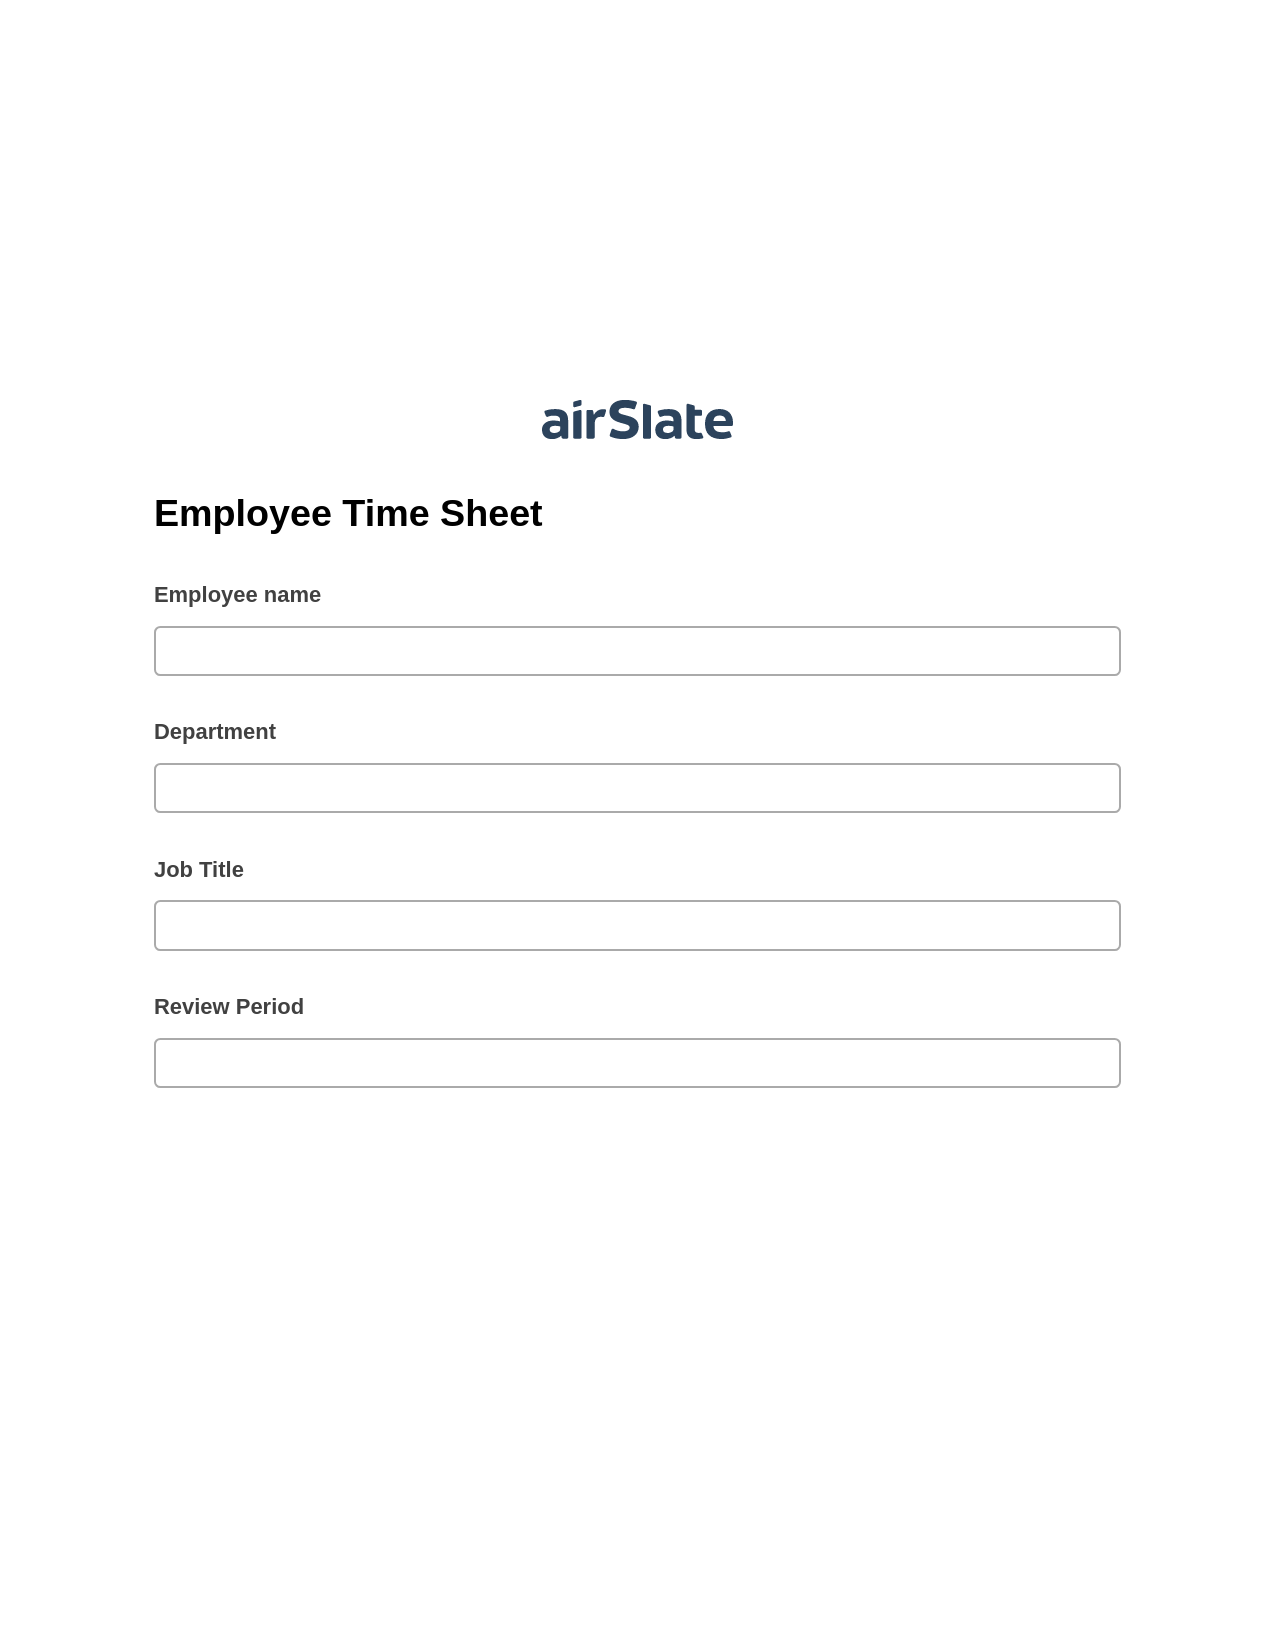 Multirole Employee Time Sheet Pre-fill from Google Sheets Bot, Unassign Role Bot, Archive to Dropbox Bot